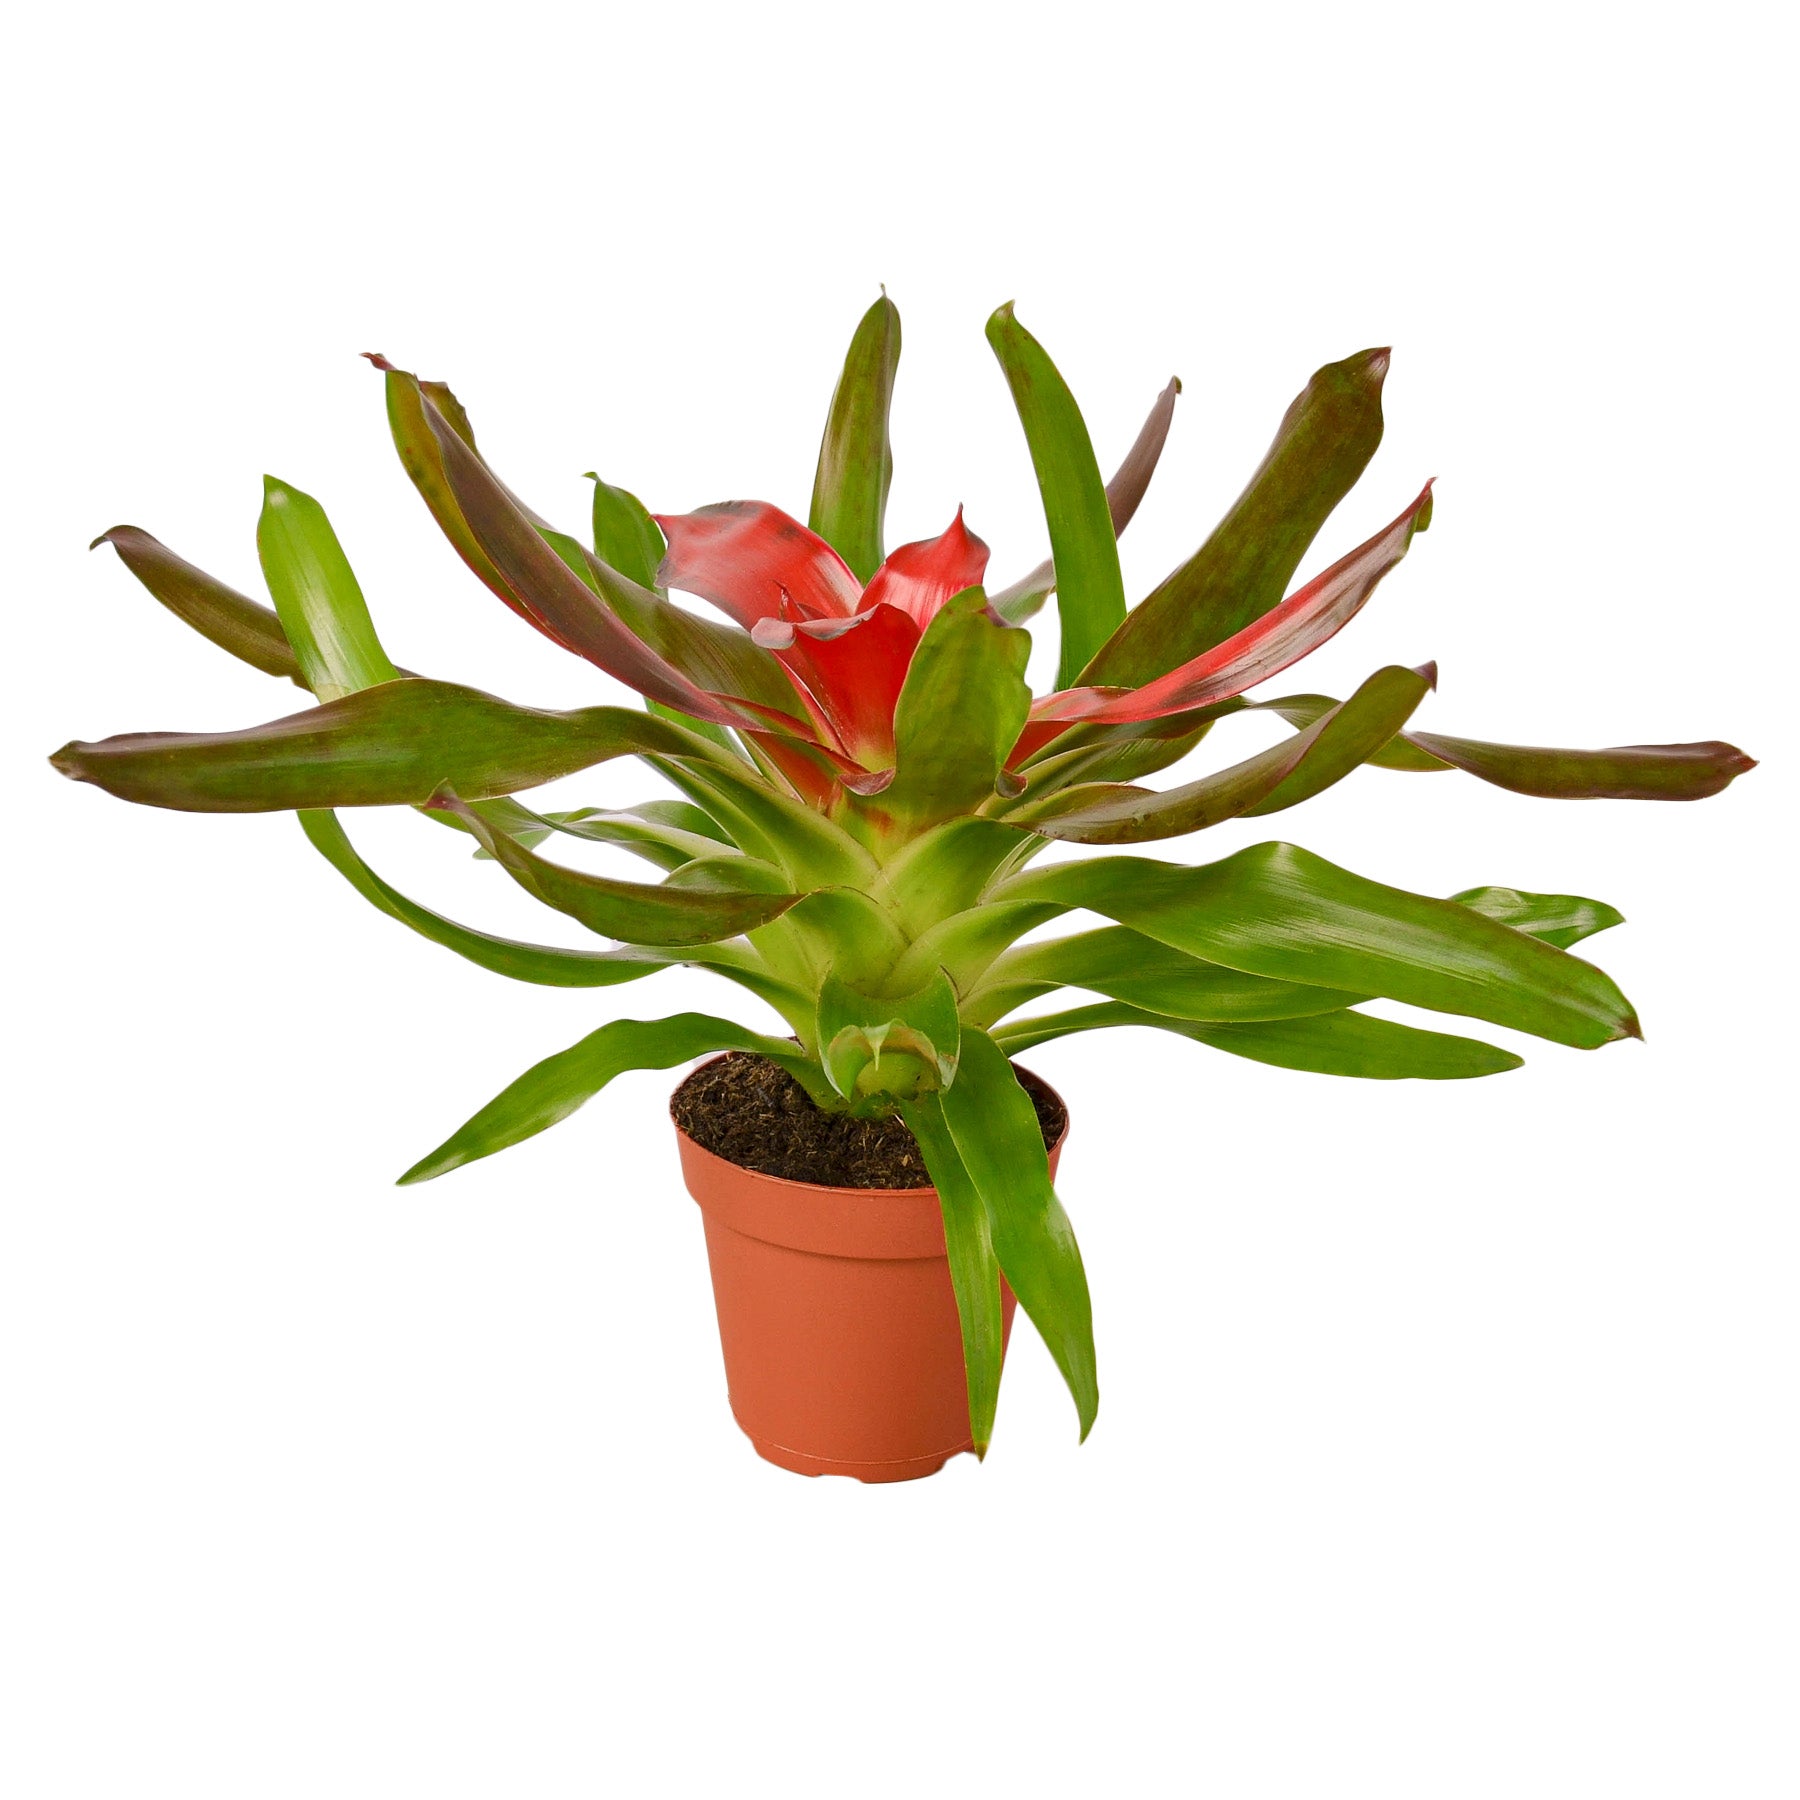 A red plant in a pot on a white background, available at the best garden center near me.